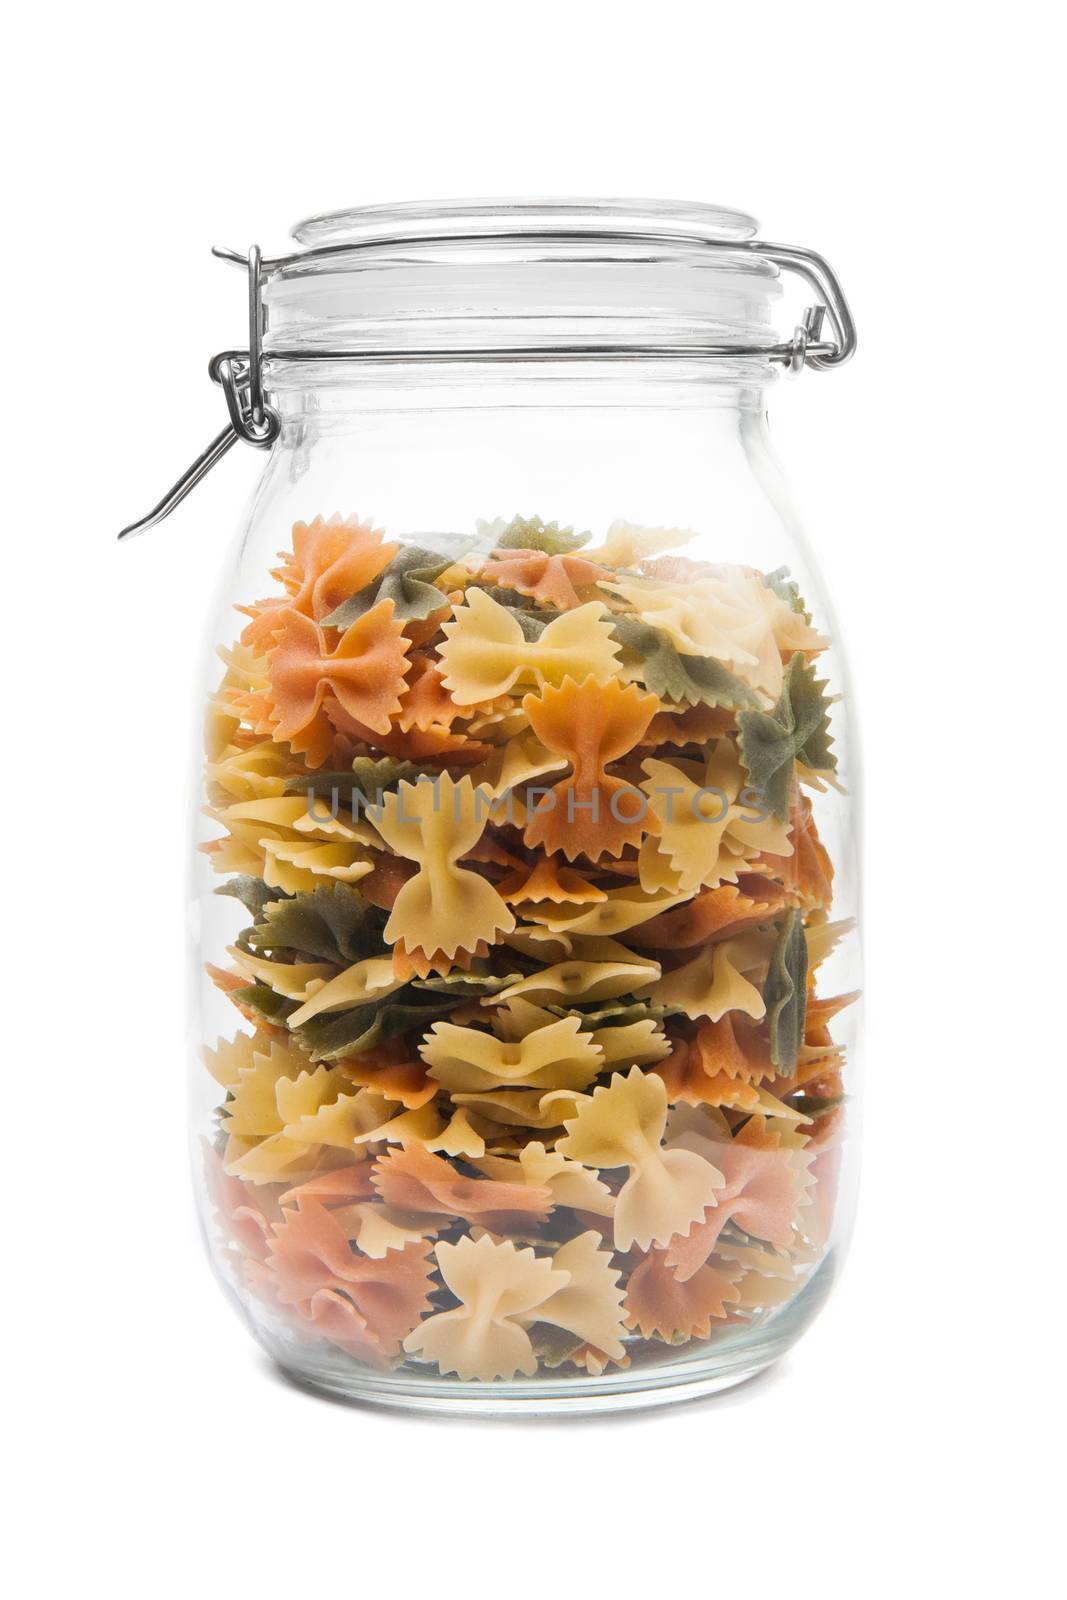 Pasta in a jar by TpaBMa